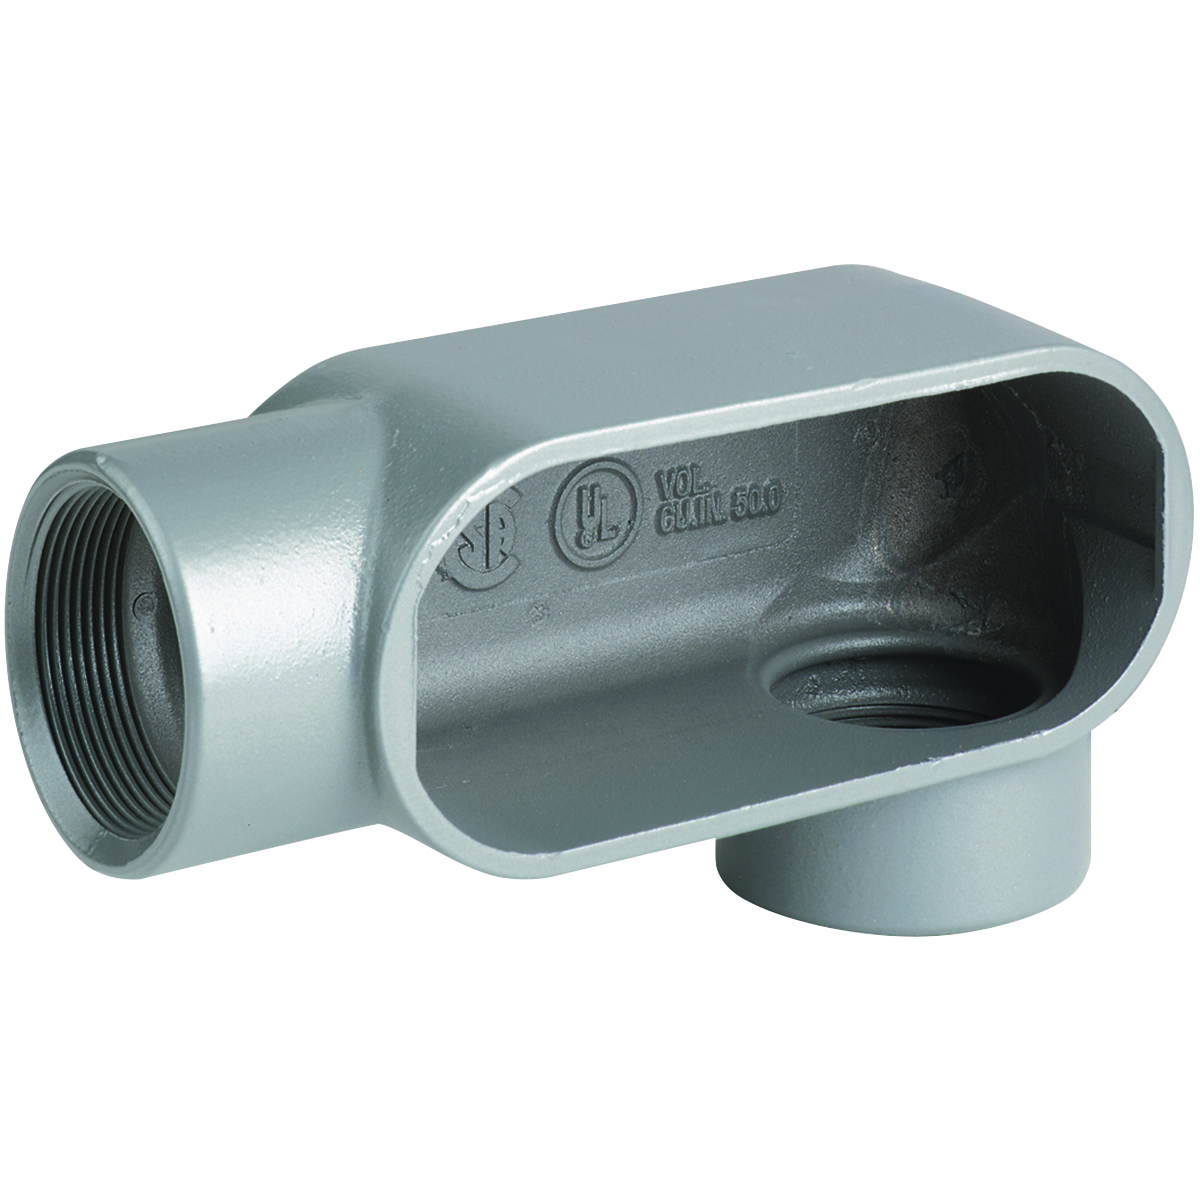 DURALOY 7 SERIES - IRON CONDUIT BODY - LL TYPE - HUB SIZE 1-1/2 INCH -VOLUME 26.0 CUBIC INCHES